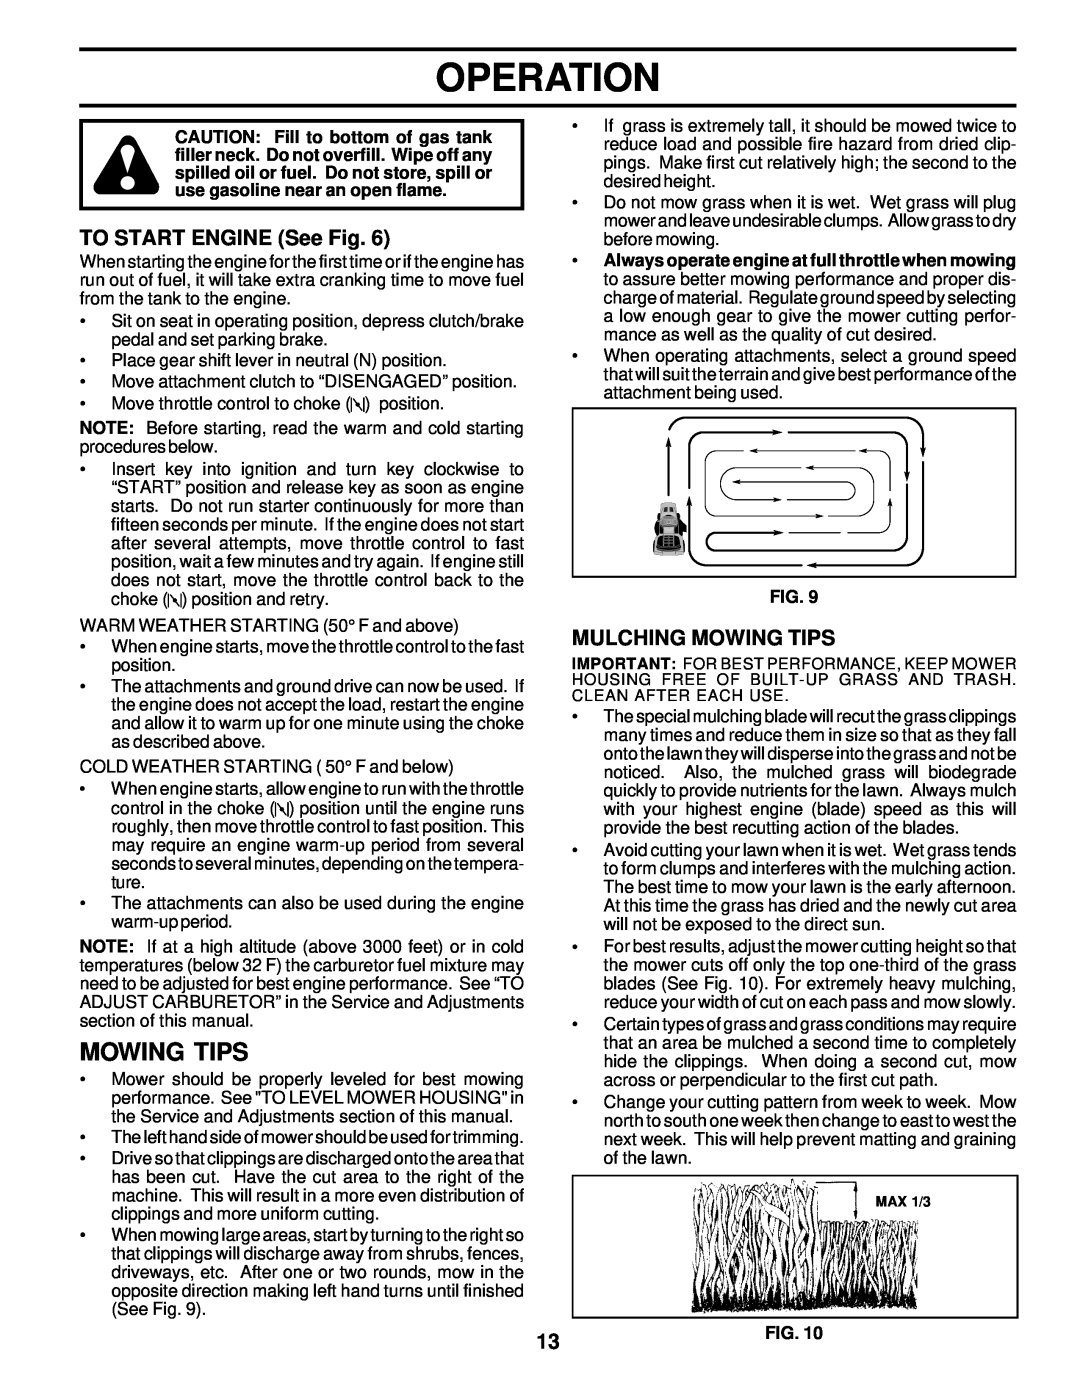 Poulan 178108 owner manual TO START ENGINE See Fig, Mulching Mowing Tips, Operation 